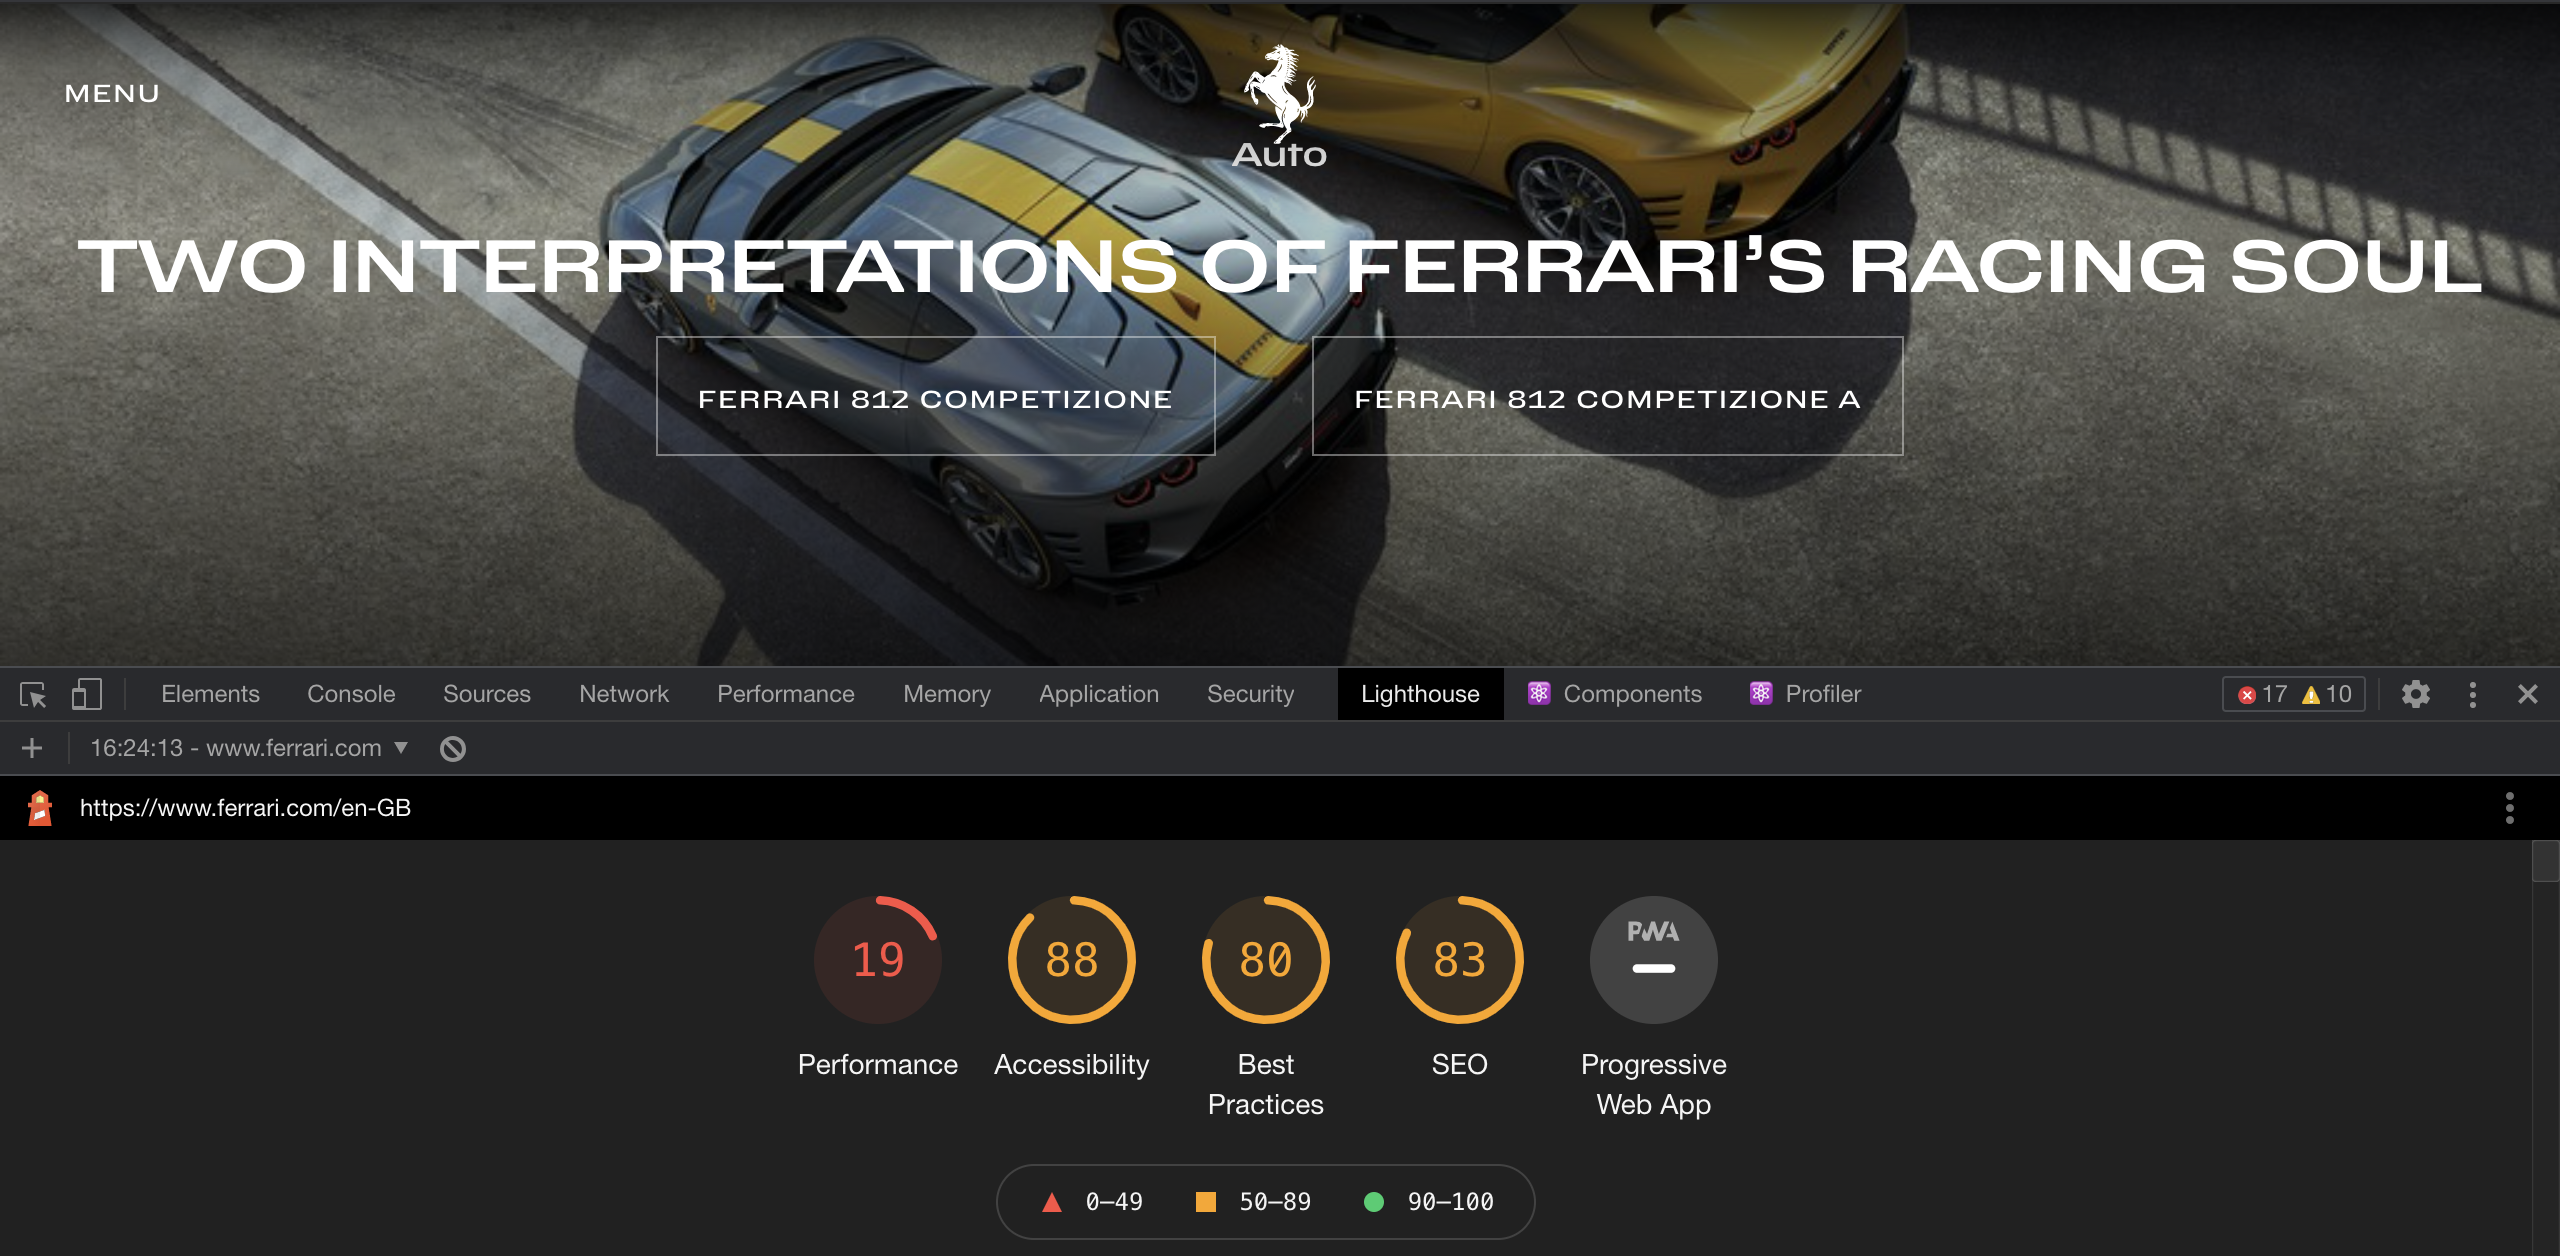 Lighthouse report for the Ferrari website. 19/100 points on performance.